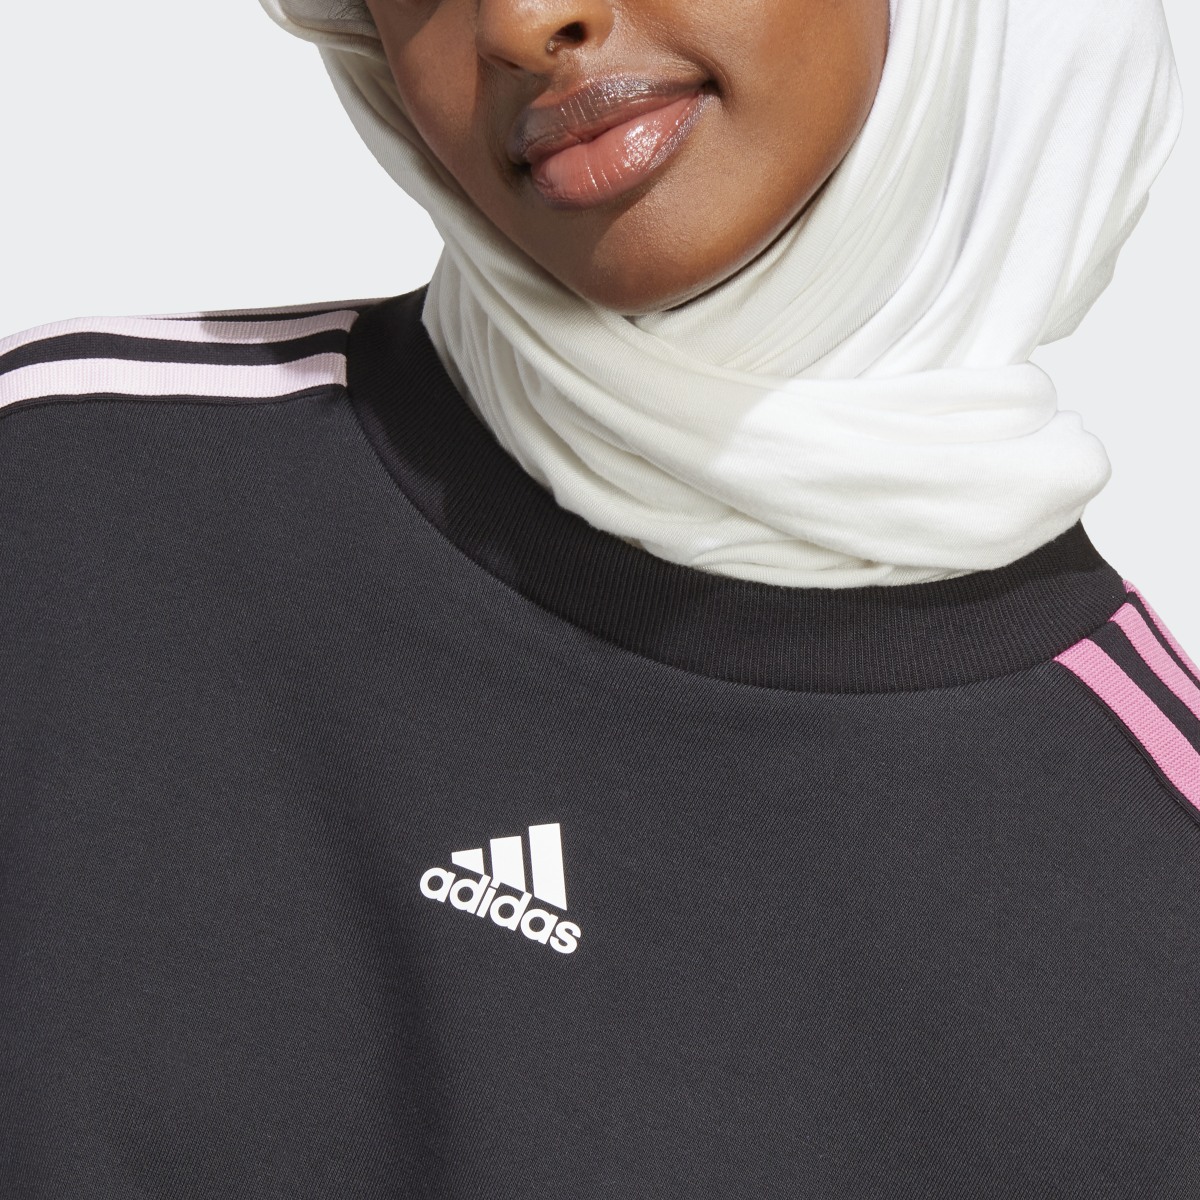 Adidas 3-Stripes Sweatshirt with Chenille Flower Patches. 7